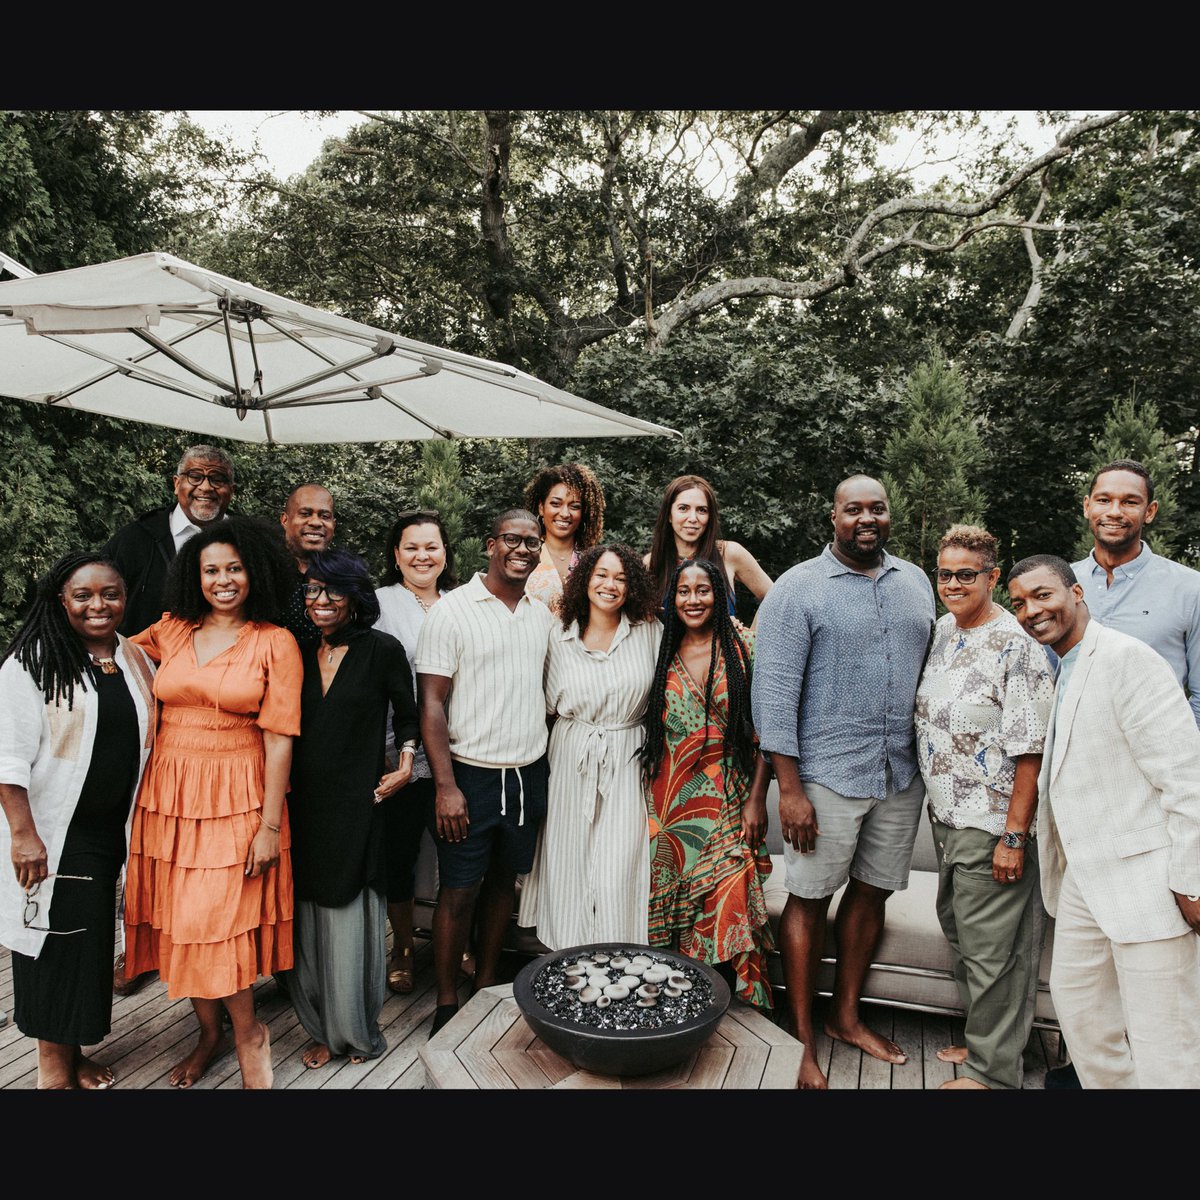 ICYMI we were at Martha's Vineyard last month, co-hosting the 2nd Culture Enterprise dinner with @msdeniese & the convo was 🔥. #CollectivePower

cc: @reformmediagrp @NathalieMolina @jacasselberryjr @LisetteNieves1 @StephLYoung @DrAlethaMaybank (1/2)